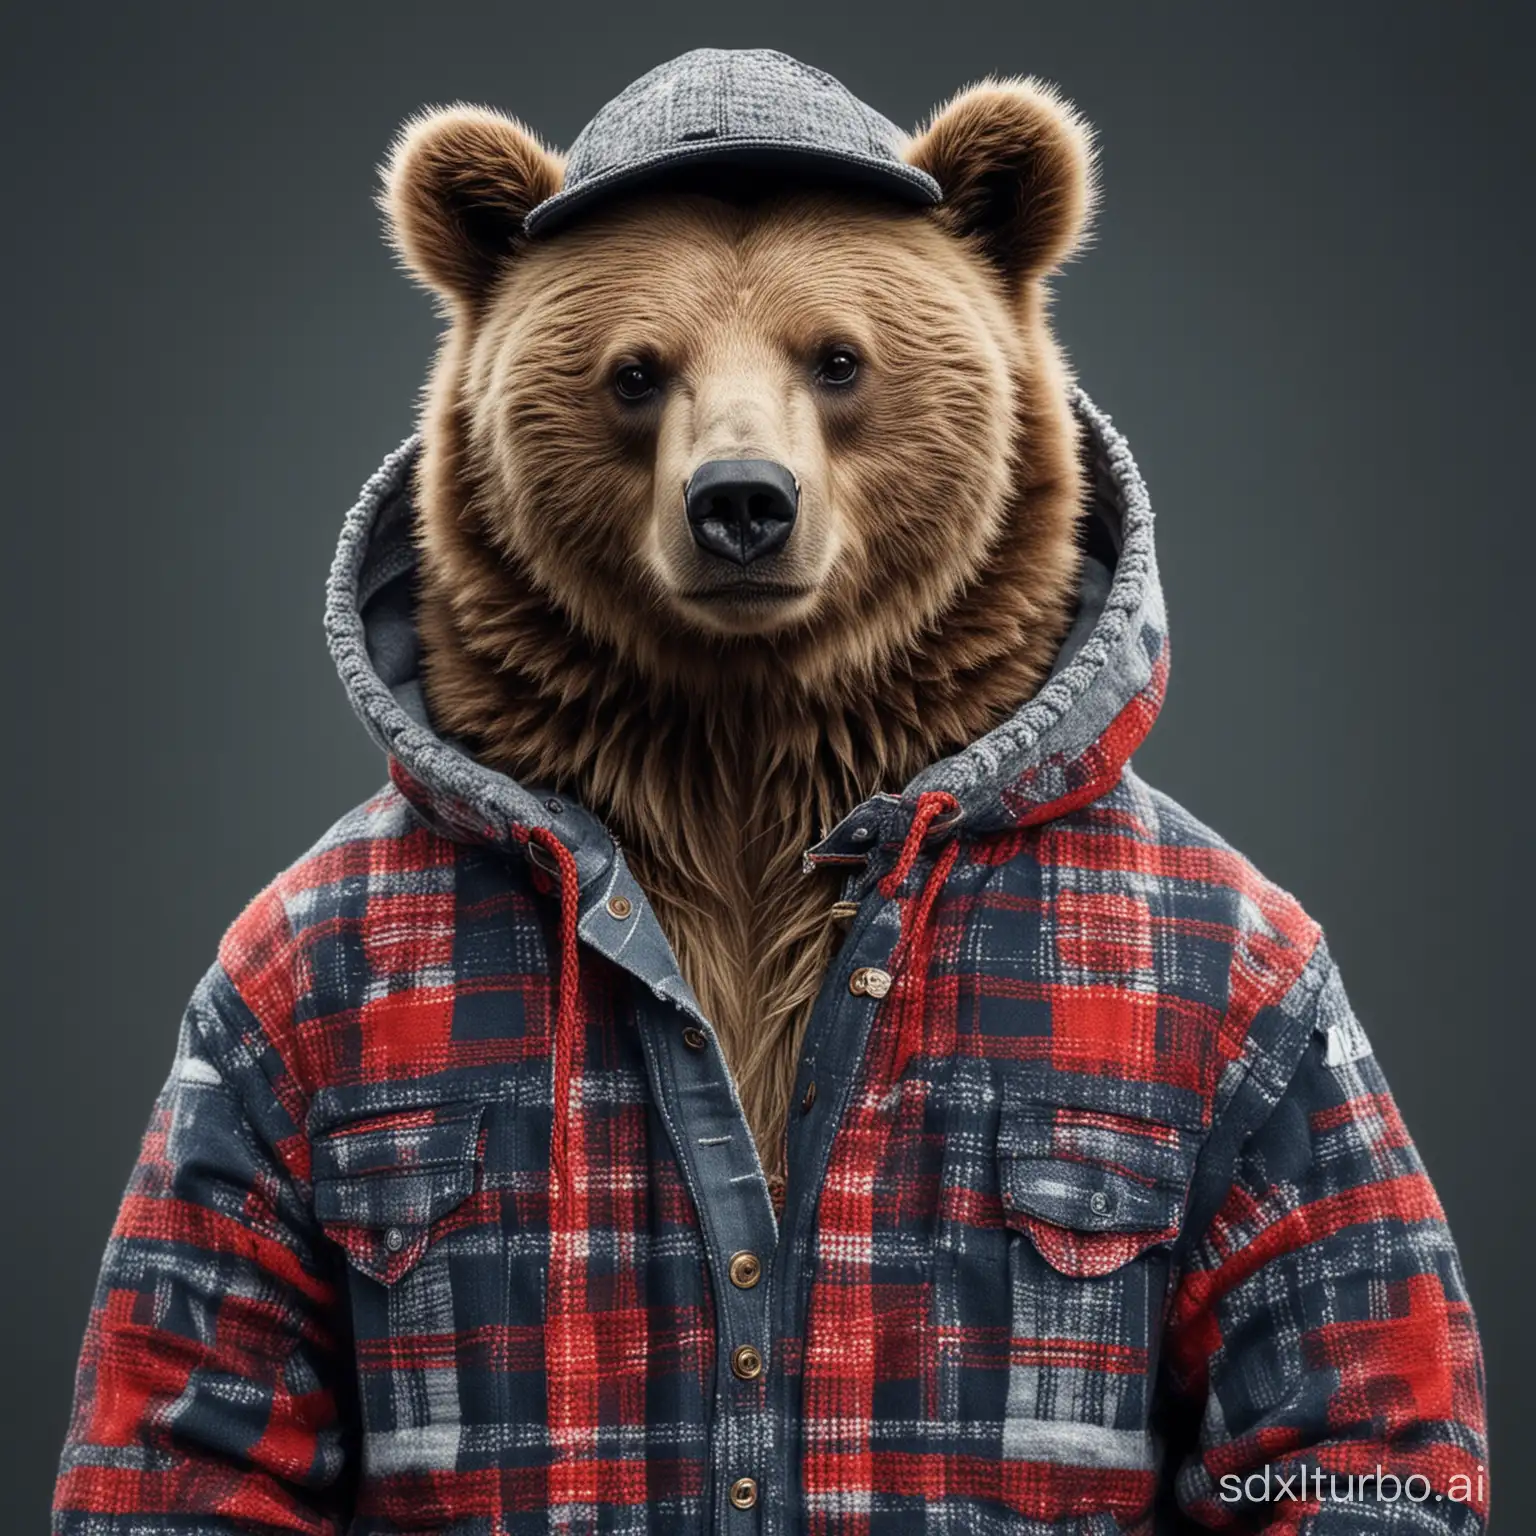 A bear wearing cool clothes